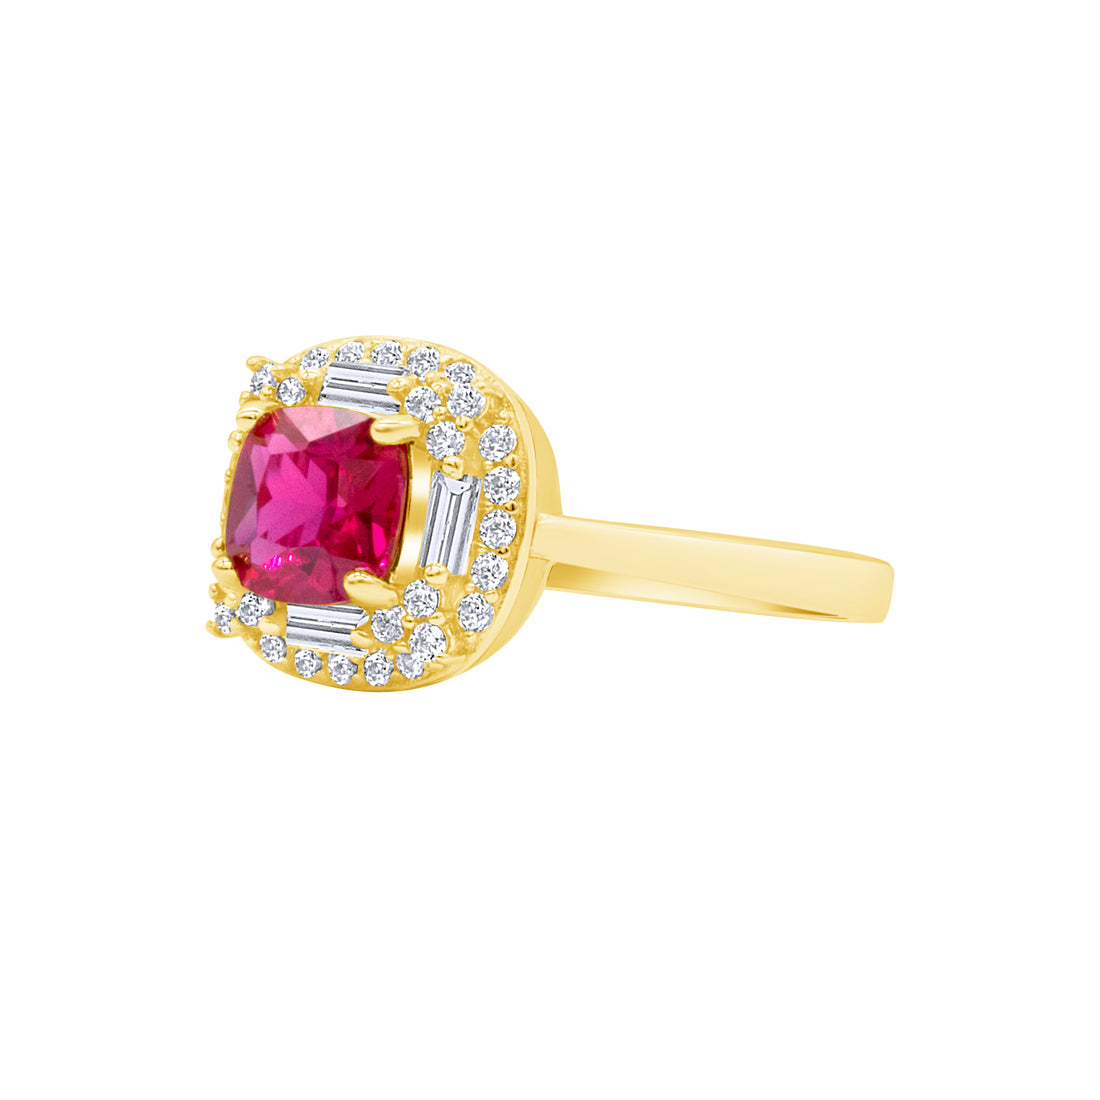 Silver, Gold Plated with Fuschia Zircon Ring